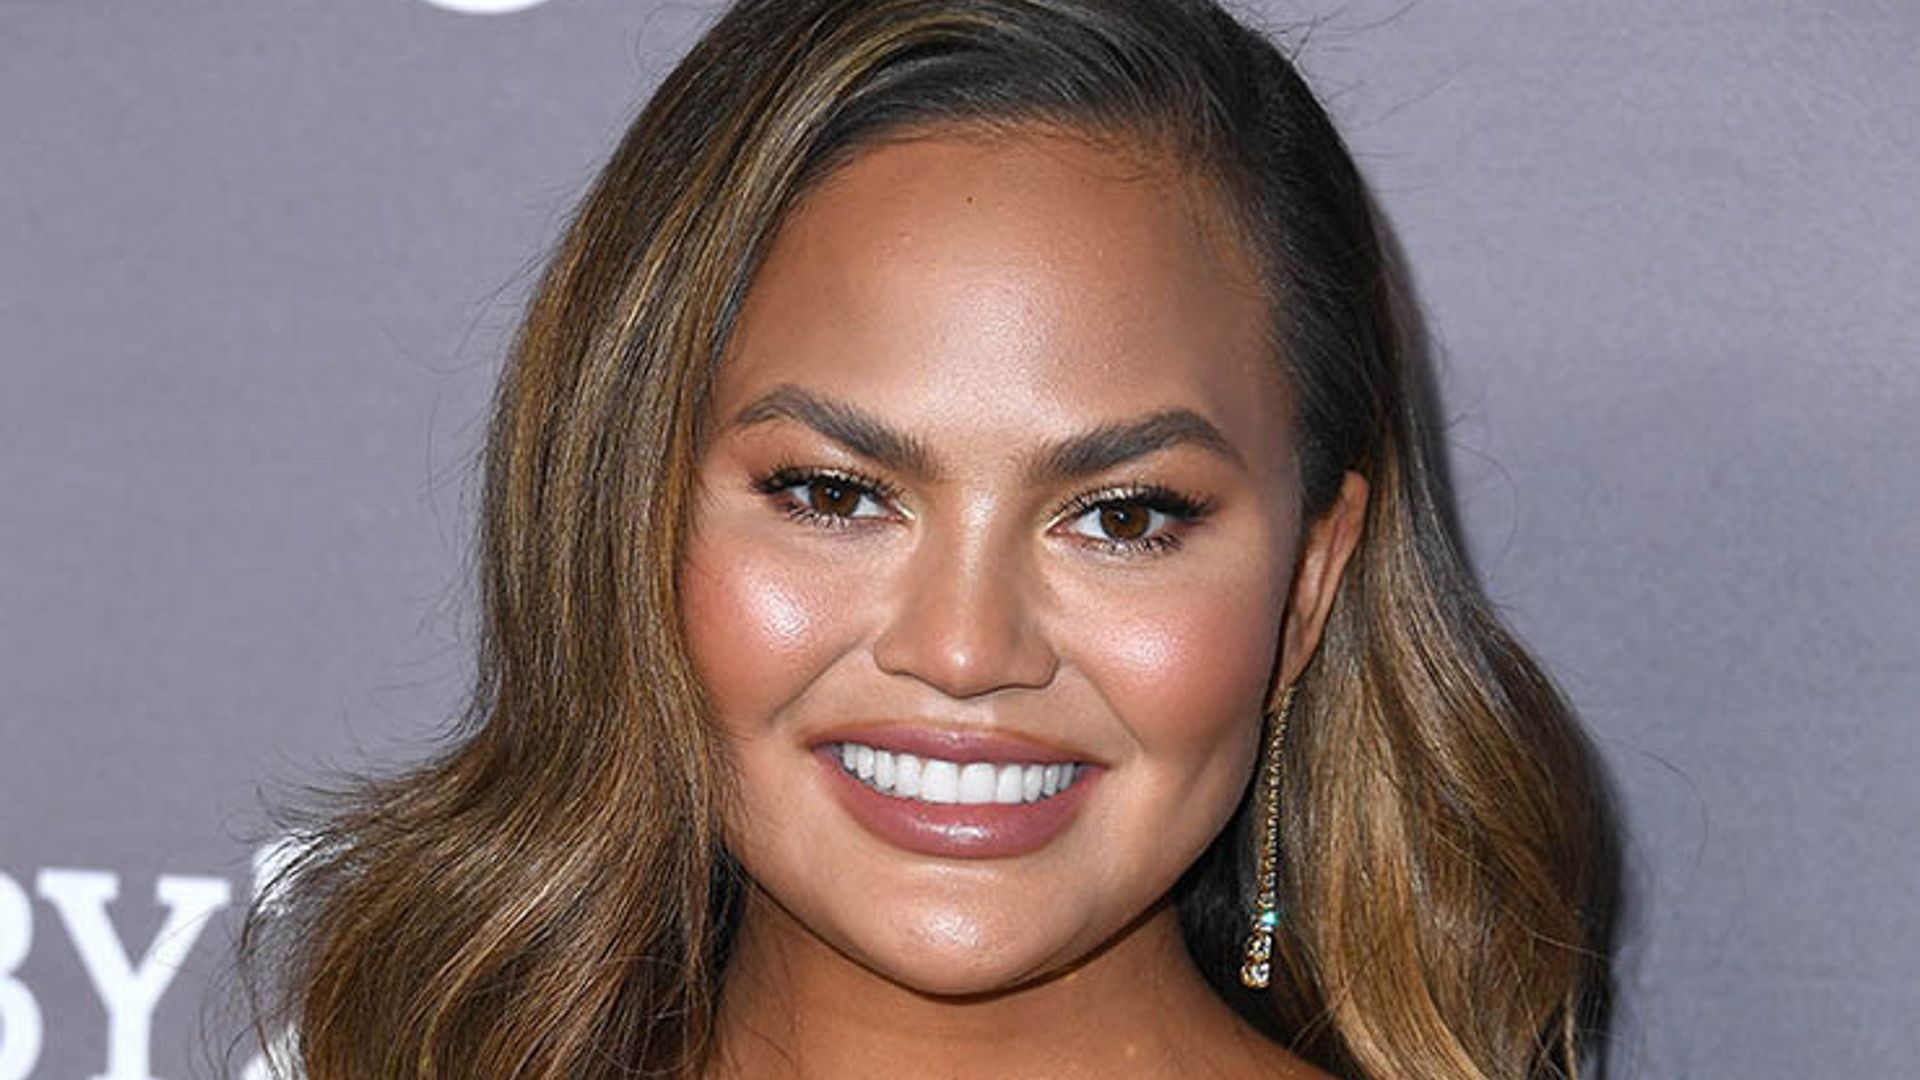 'It's time for me to say goodbye': Chrissy Teigen deletes her Twitter account after 10 years